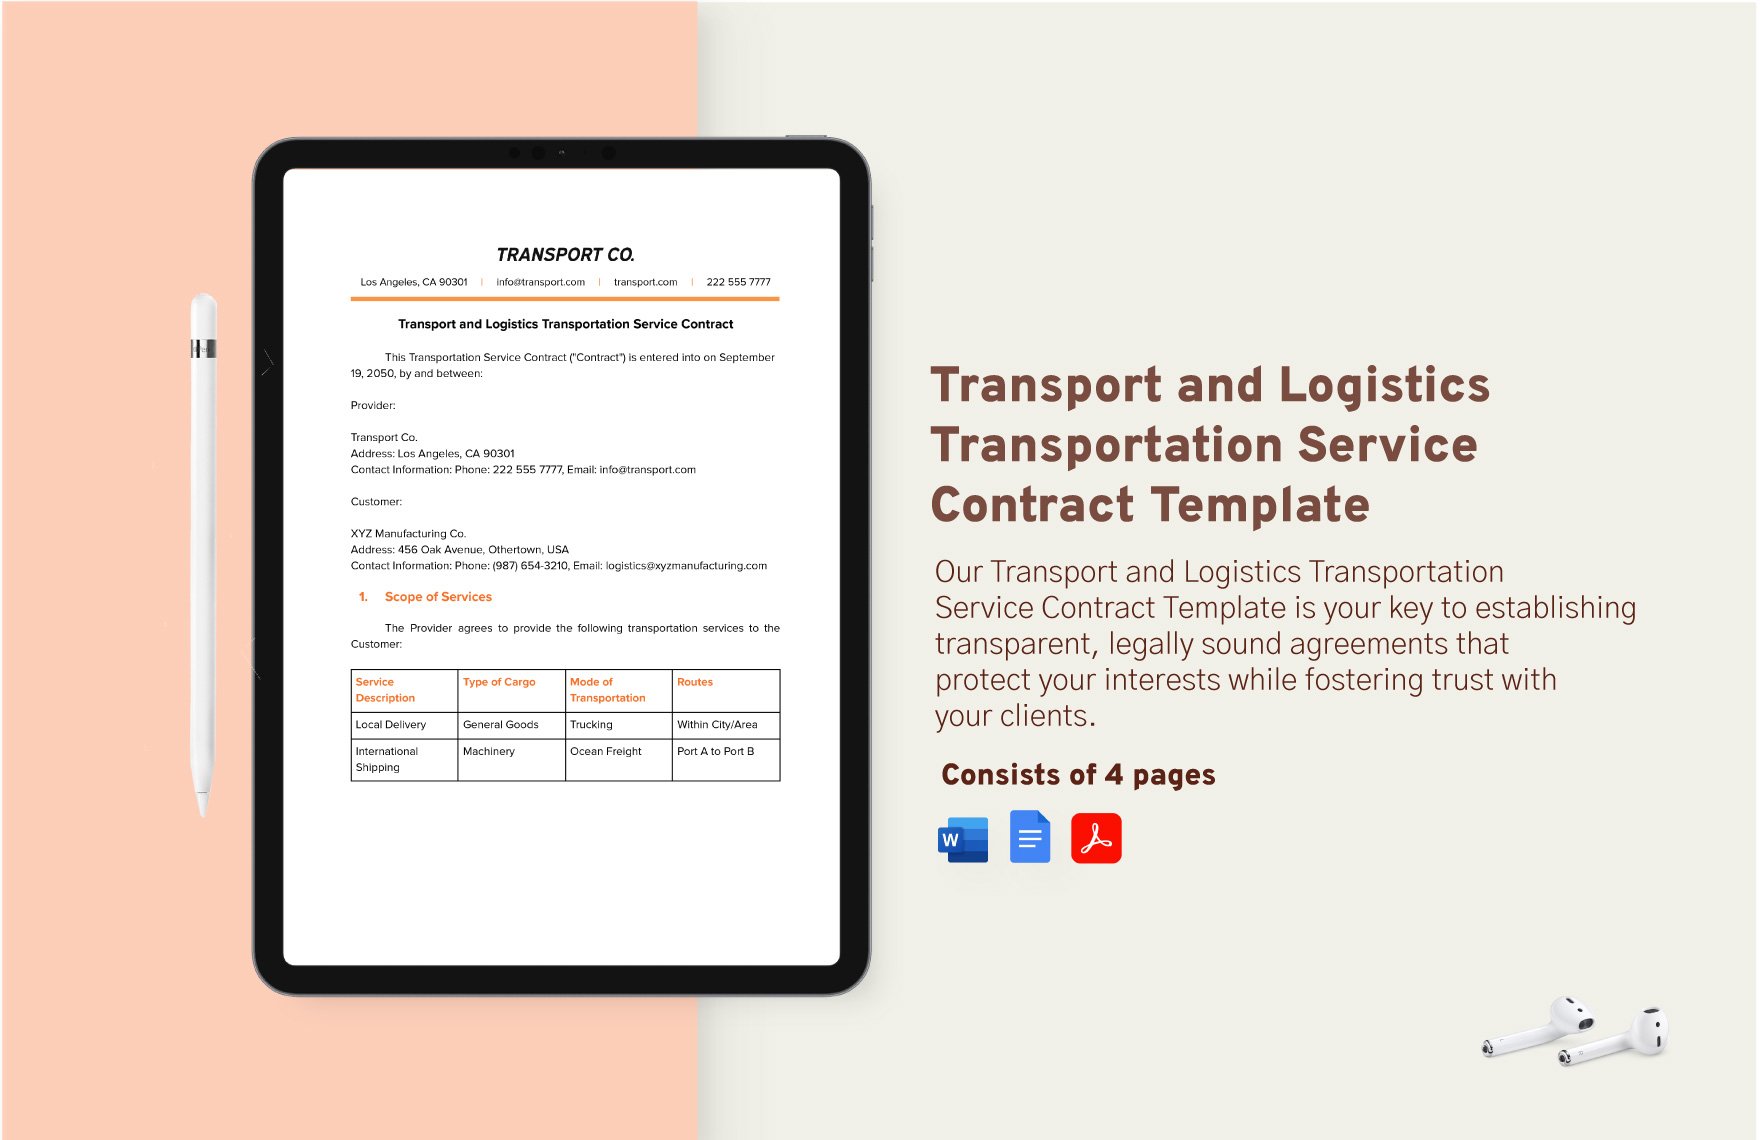 Transport and Logistics Transportation Service Contract Template